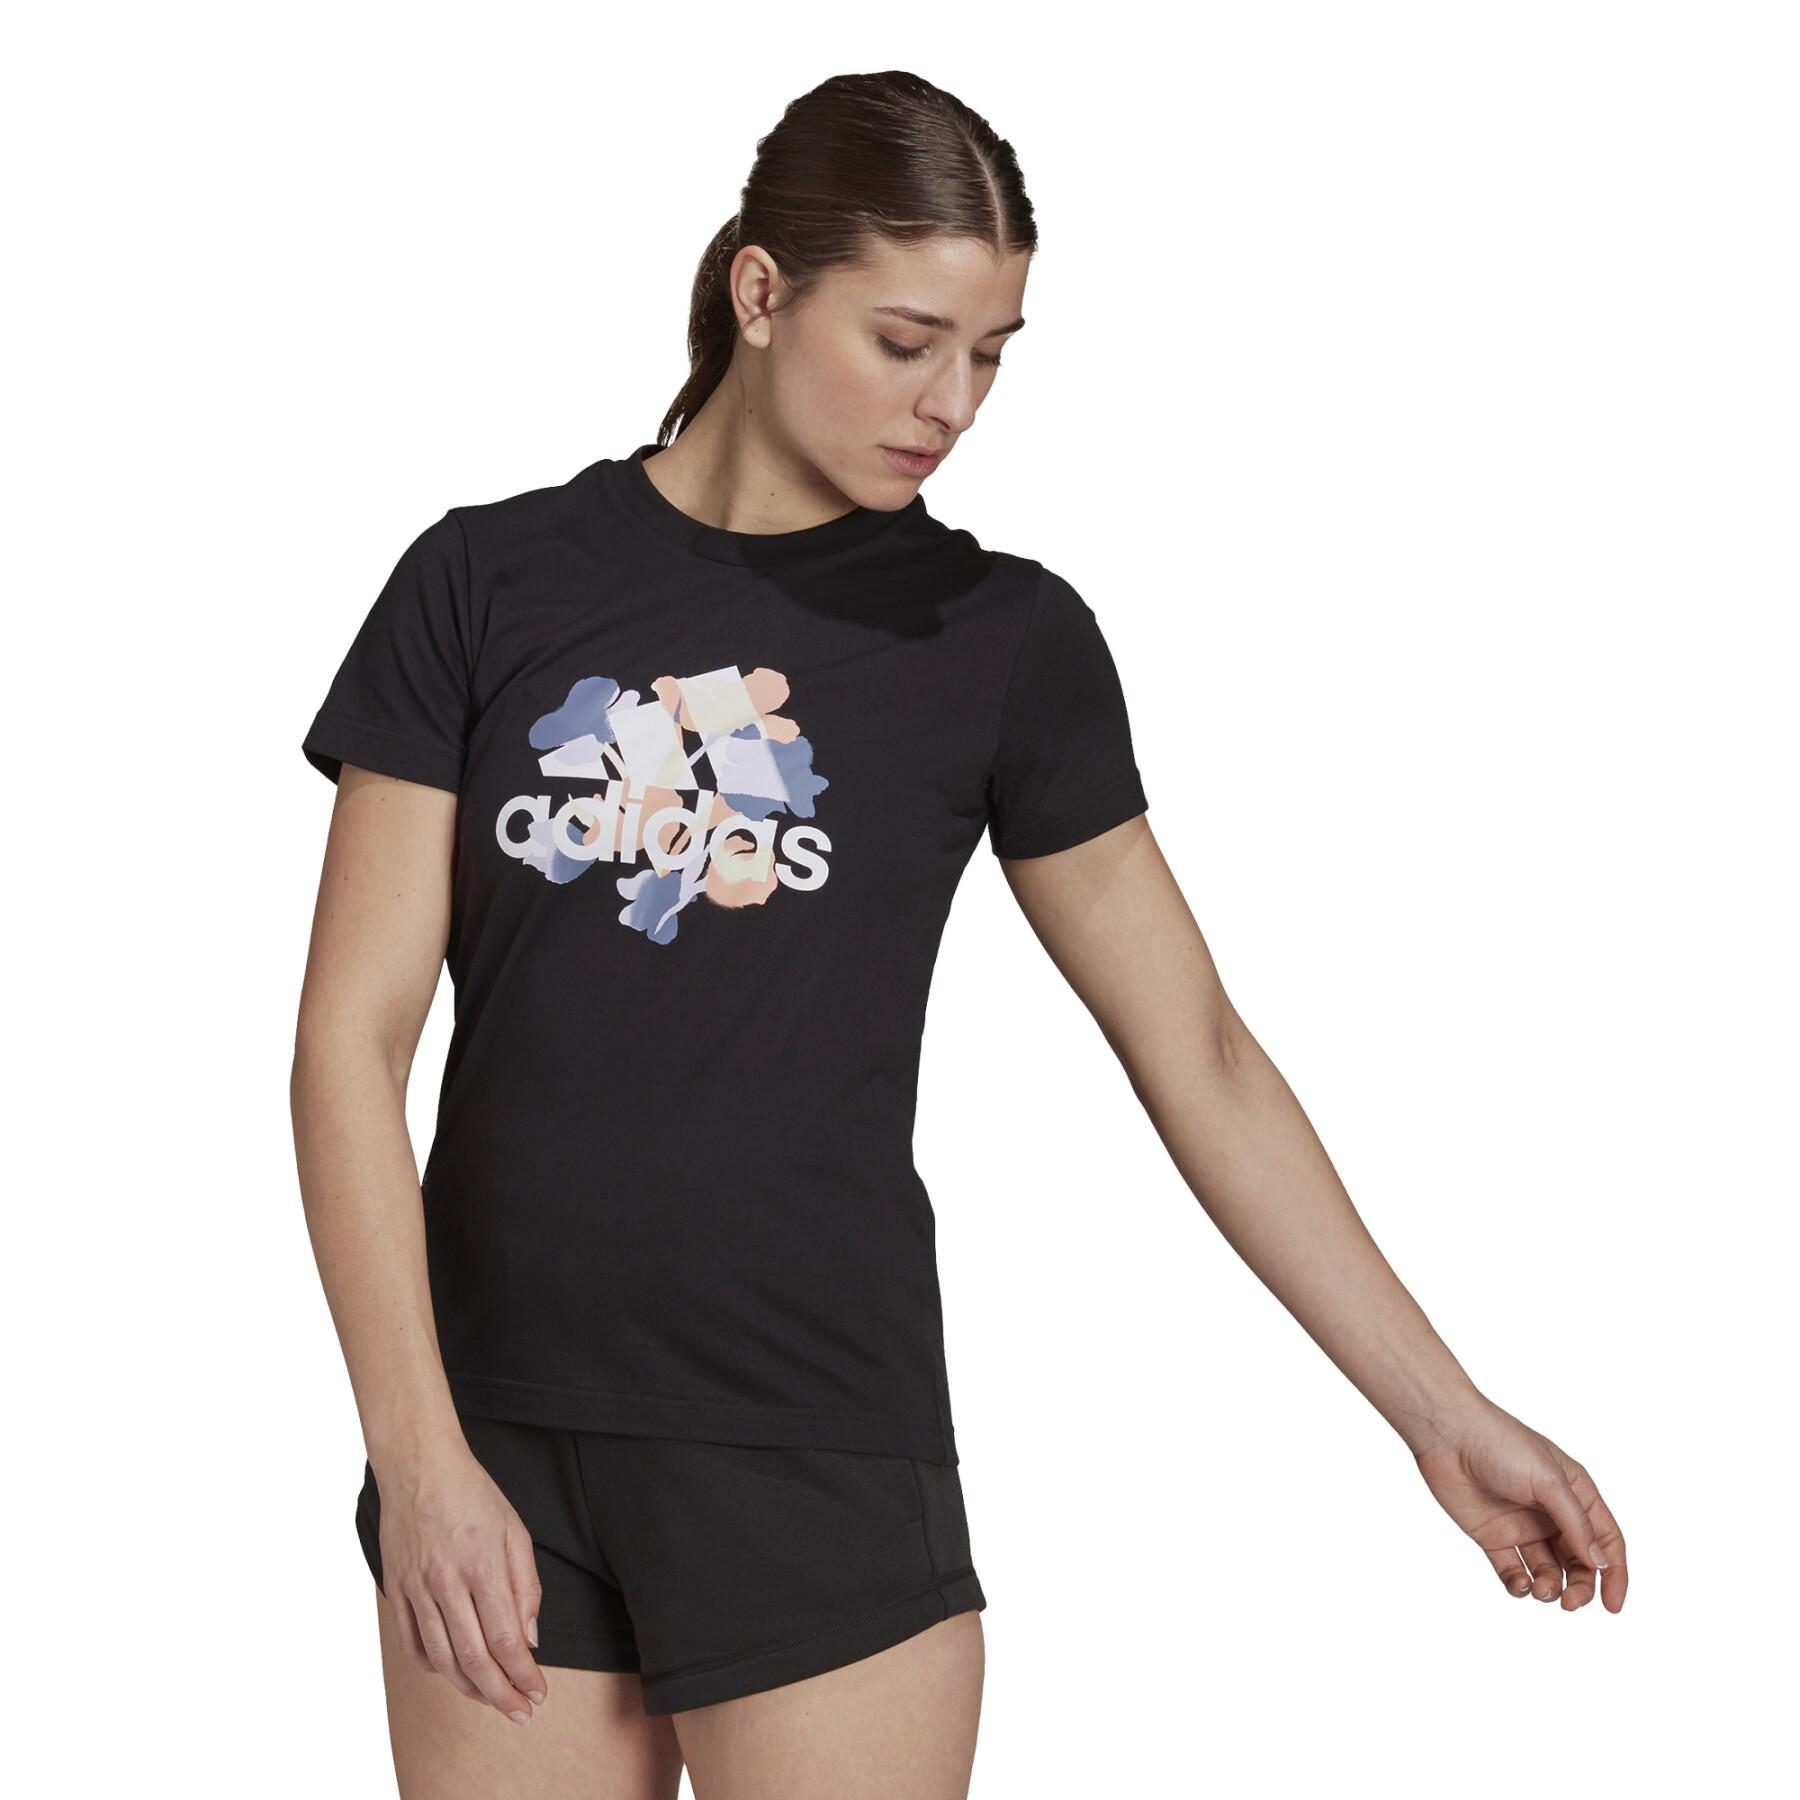 T-shirt donna adidas Floral Graphic